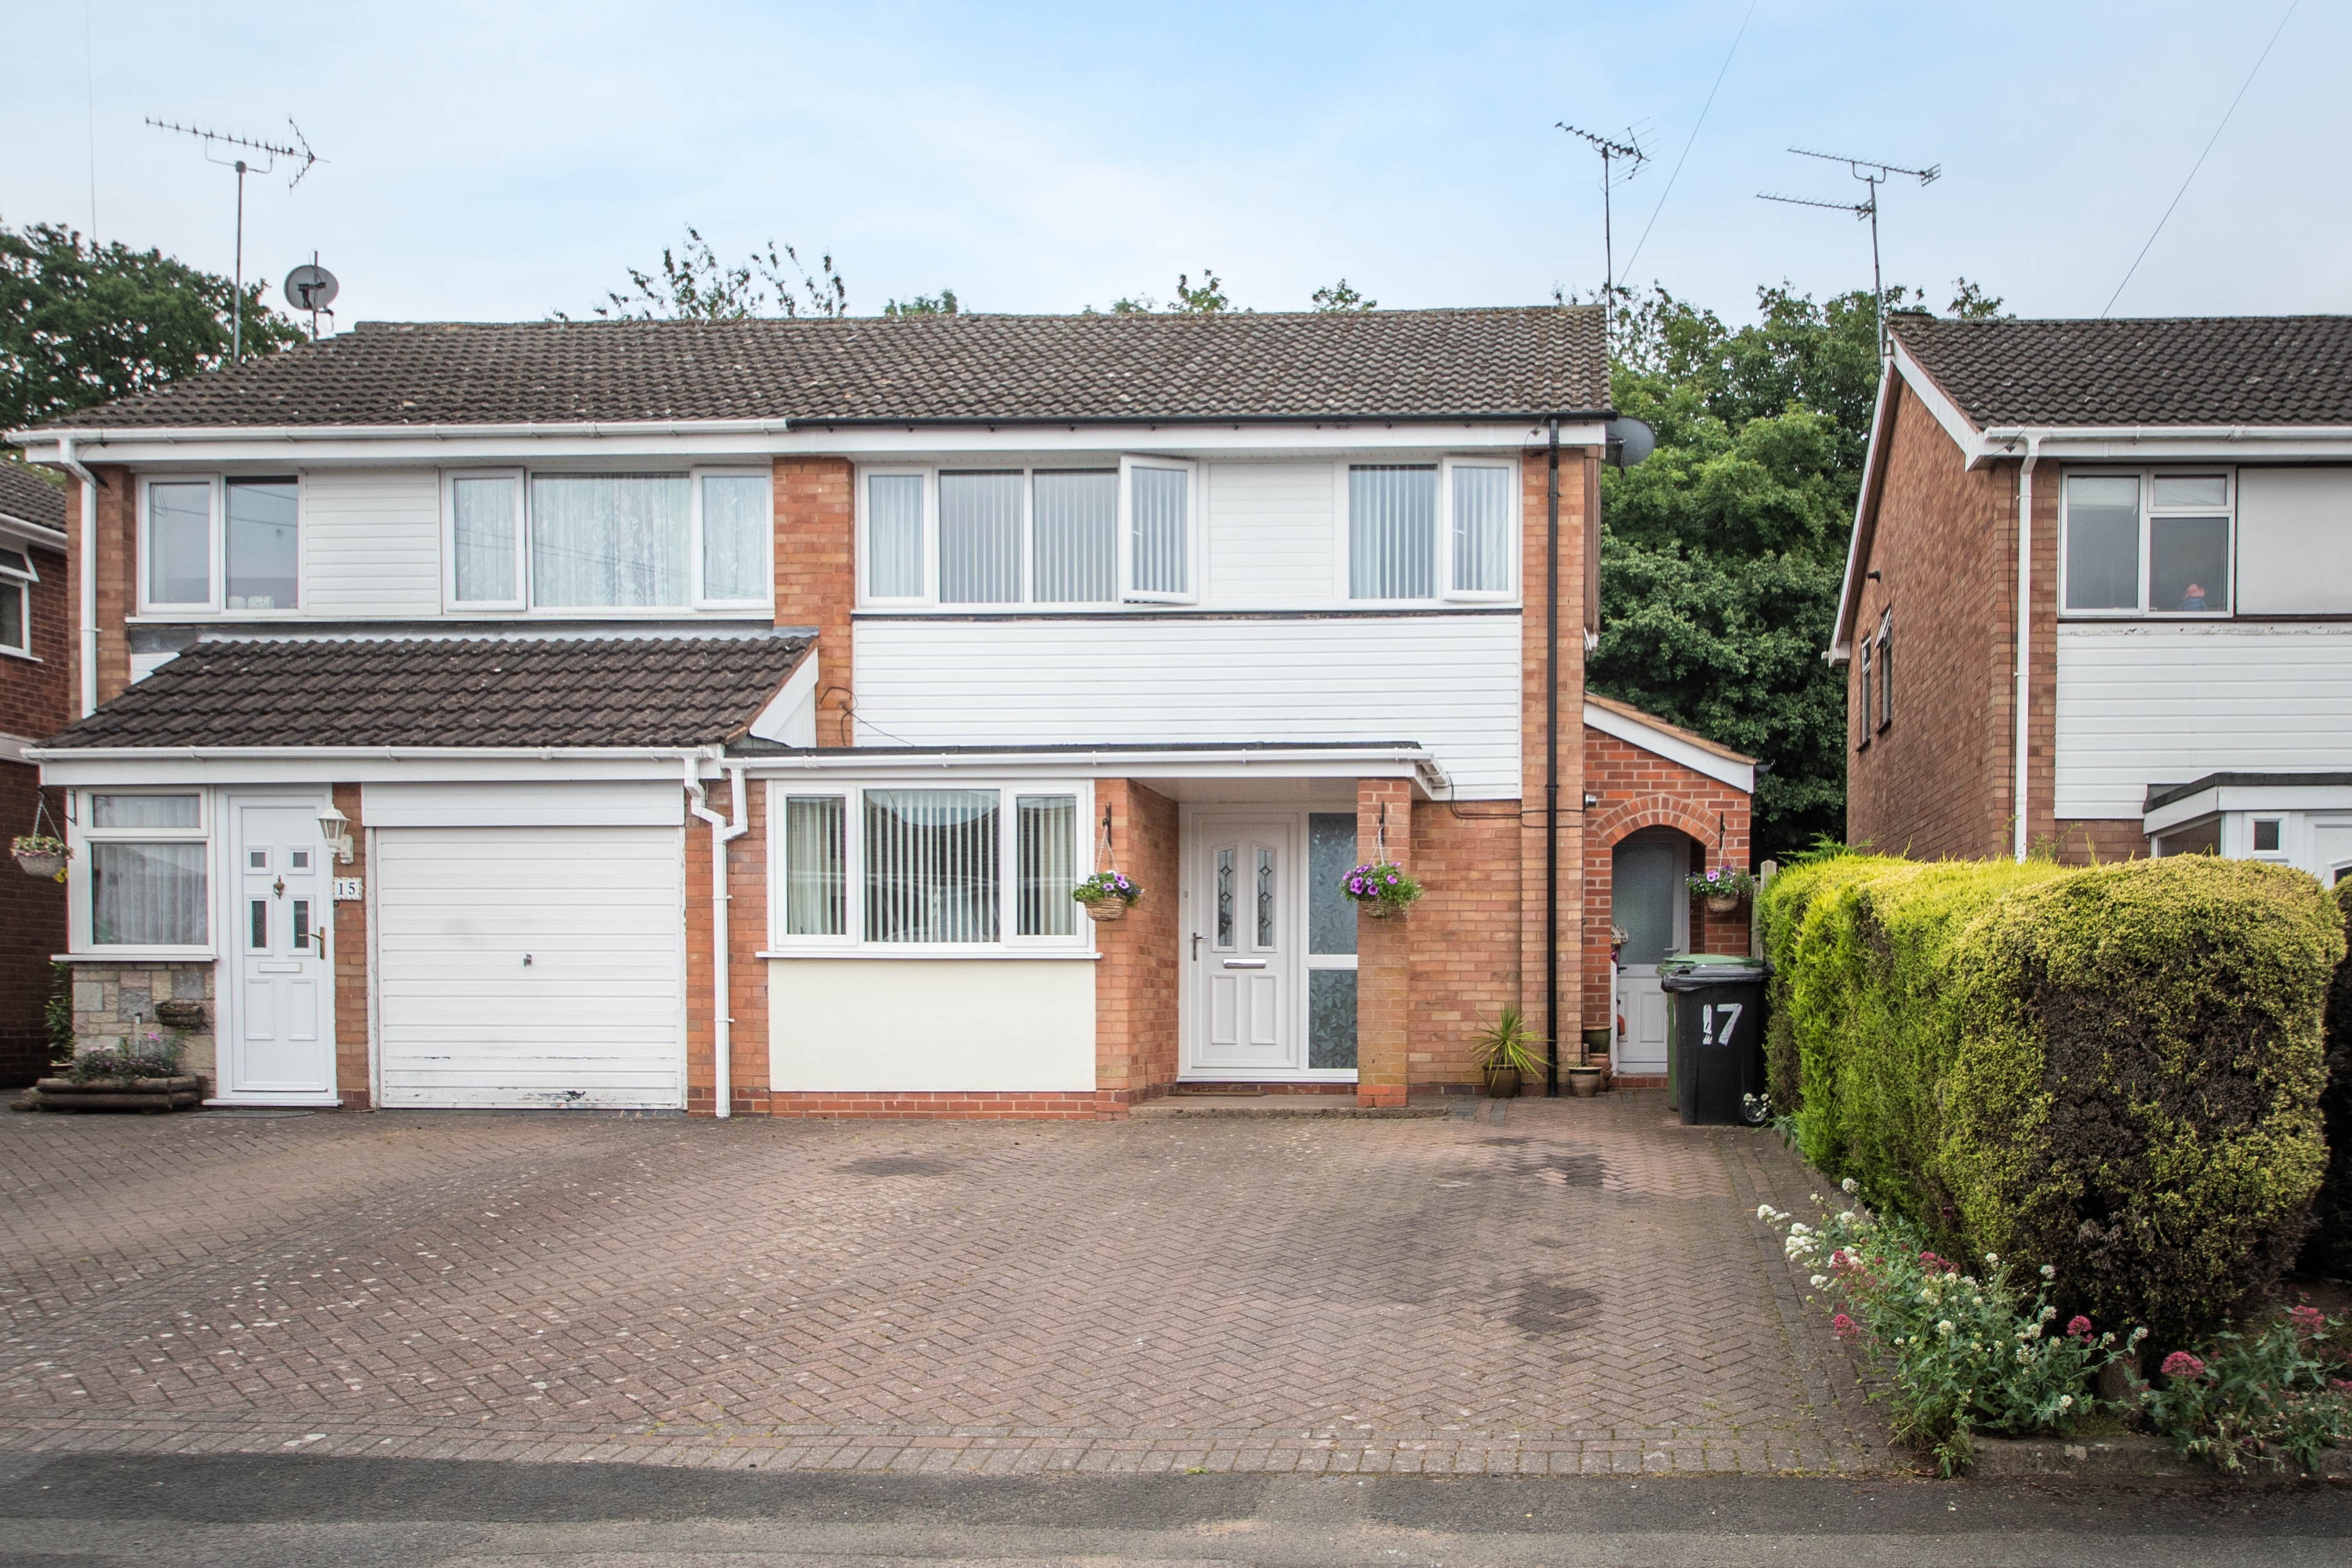 3 bed house for sale in Marlpool Drive, Redditch - Property Image 1